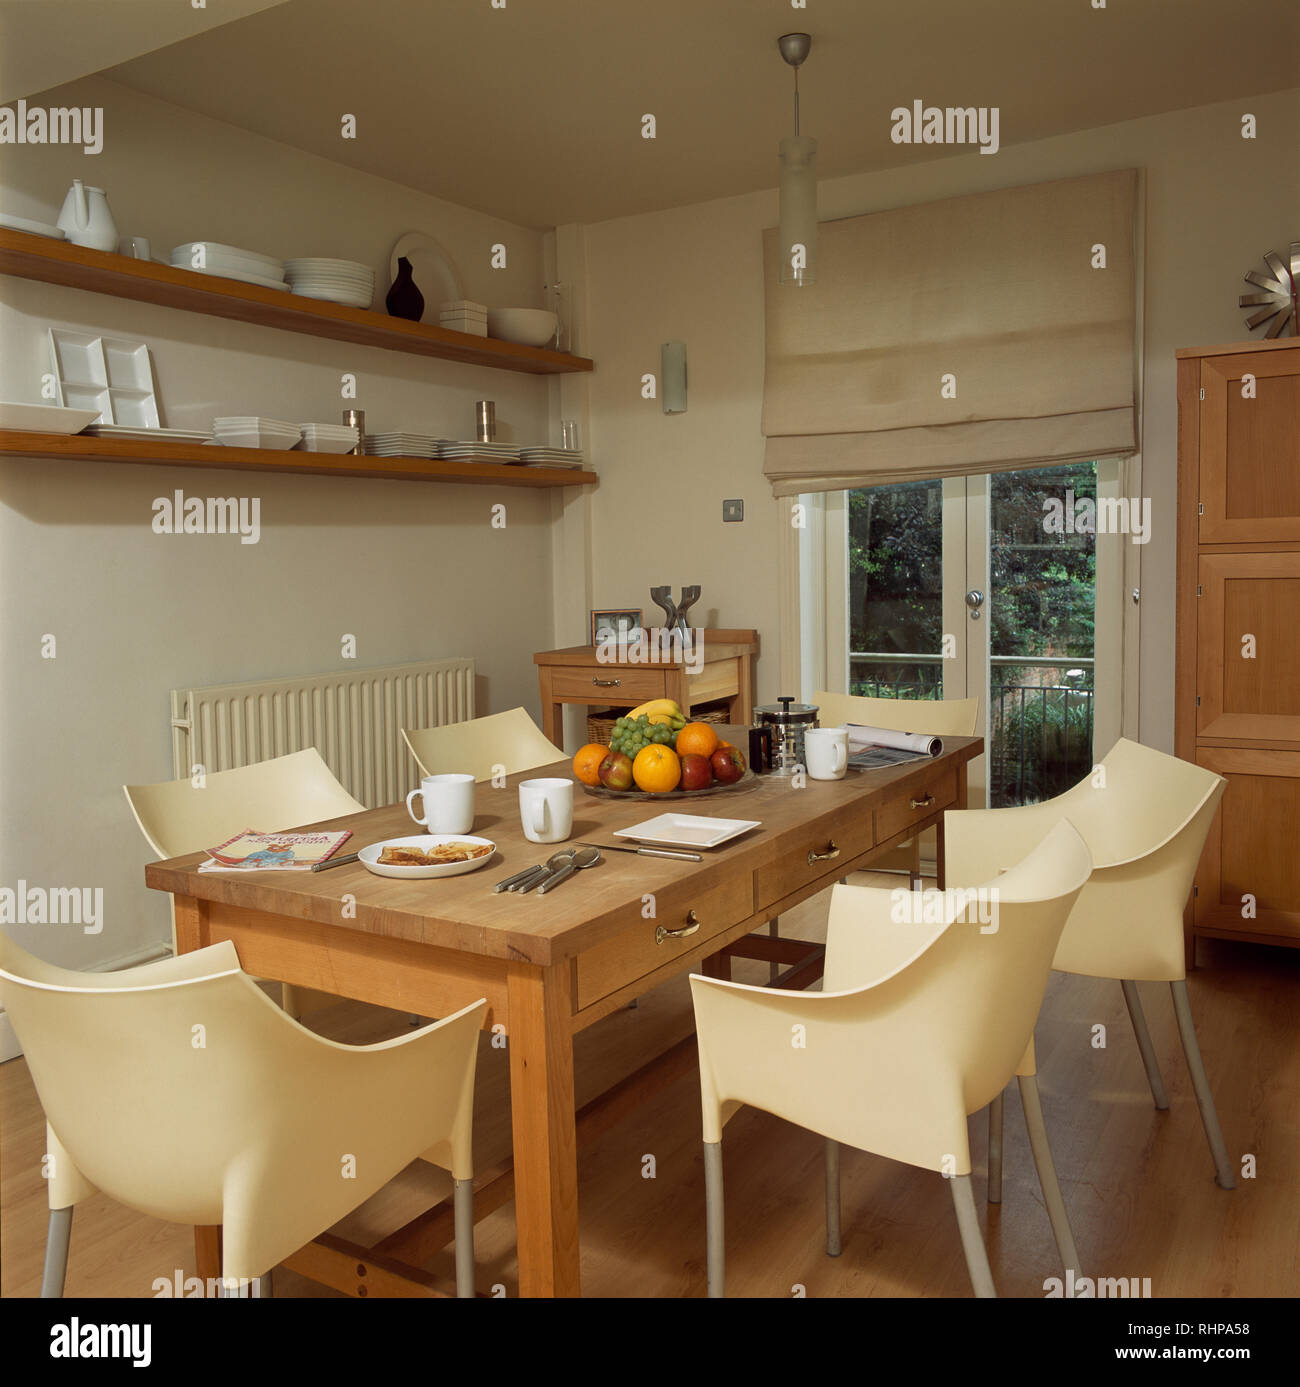 Cream Polypropylene Chairs And Pine Table In Modern Dining Room Stock Photo Alamy